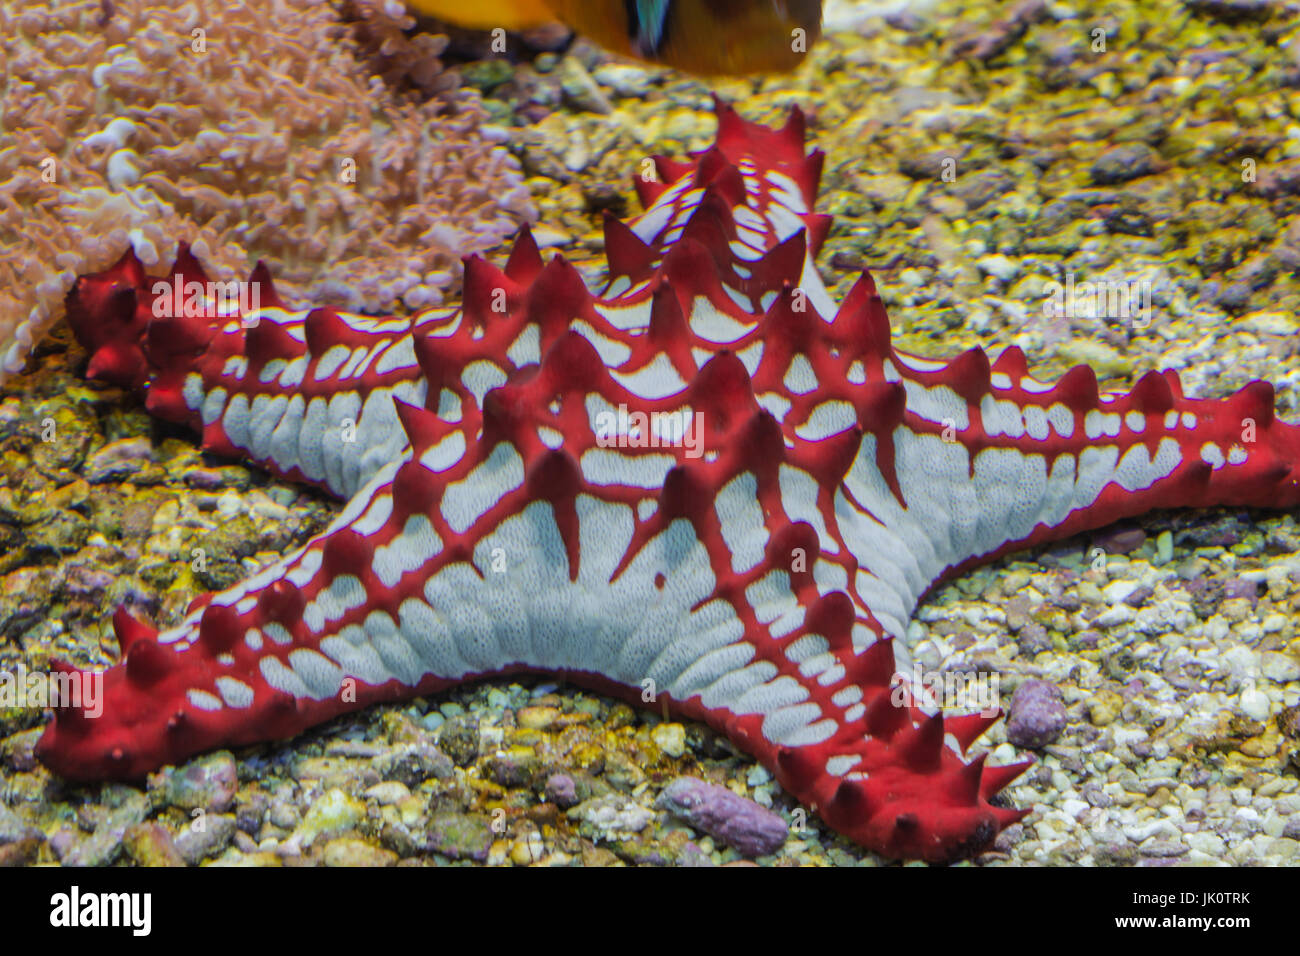 Lincks Roller Seester, Protoreaster linckii, Red Sea Star from the Indian Ocean. Stock Photo